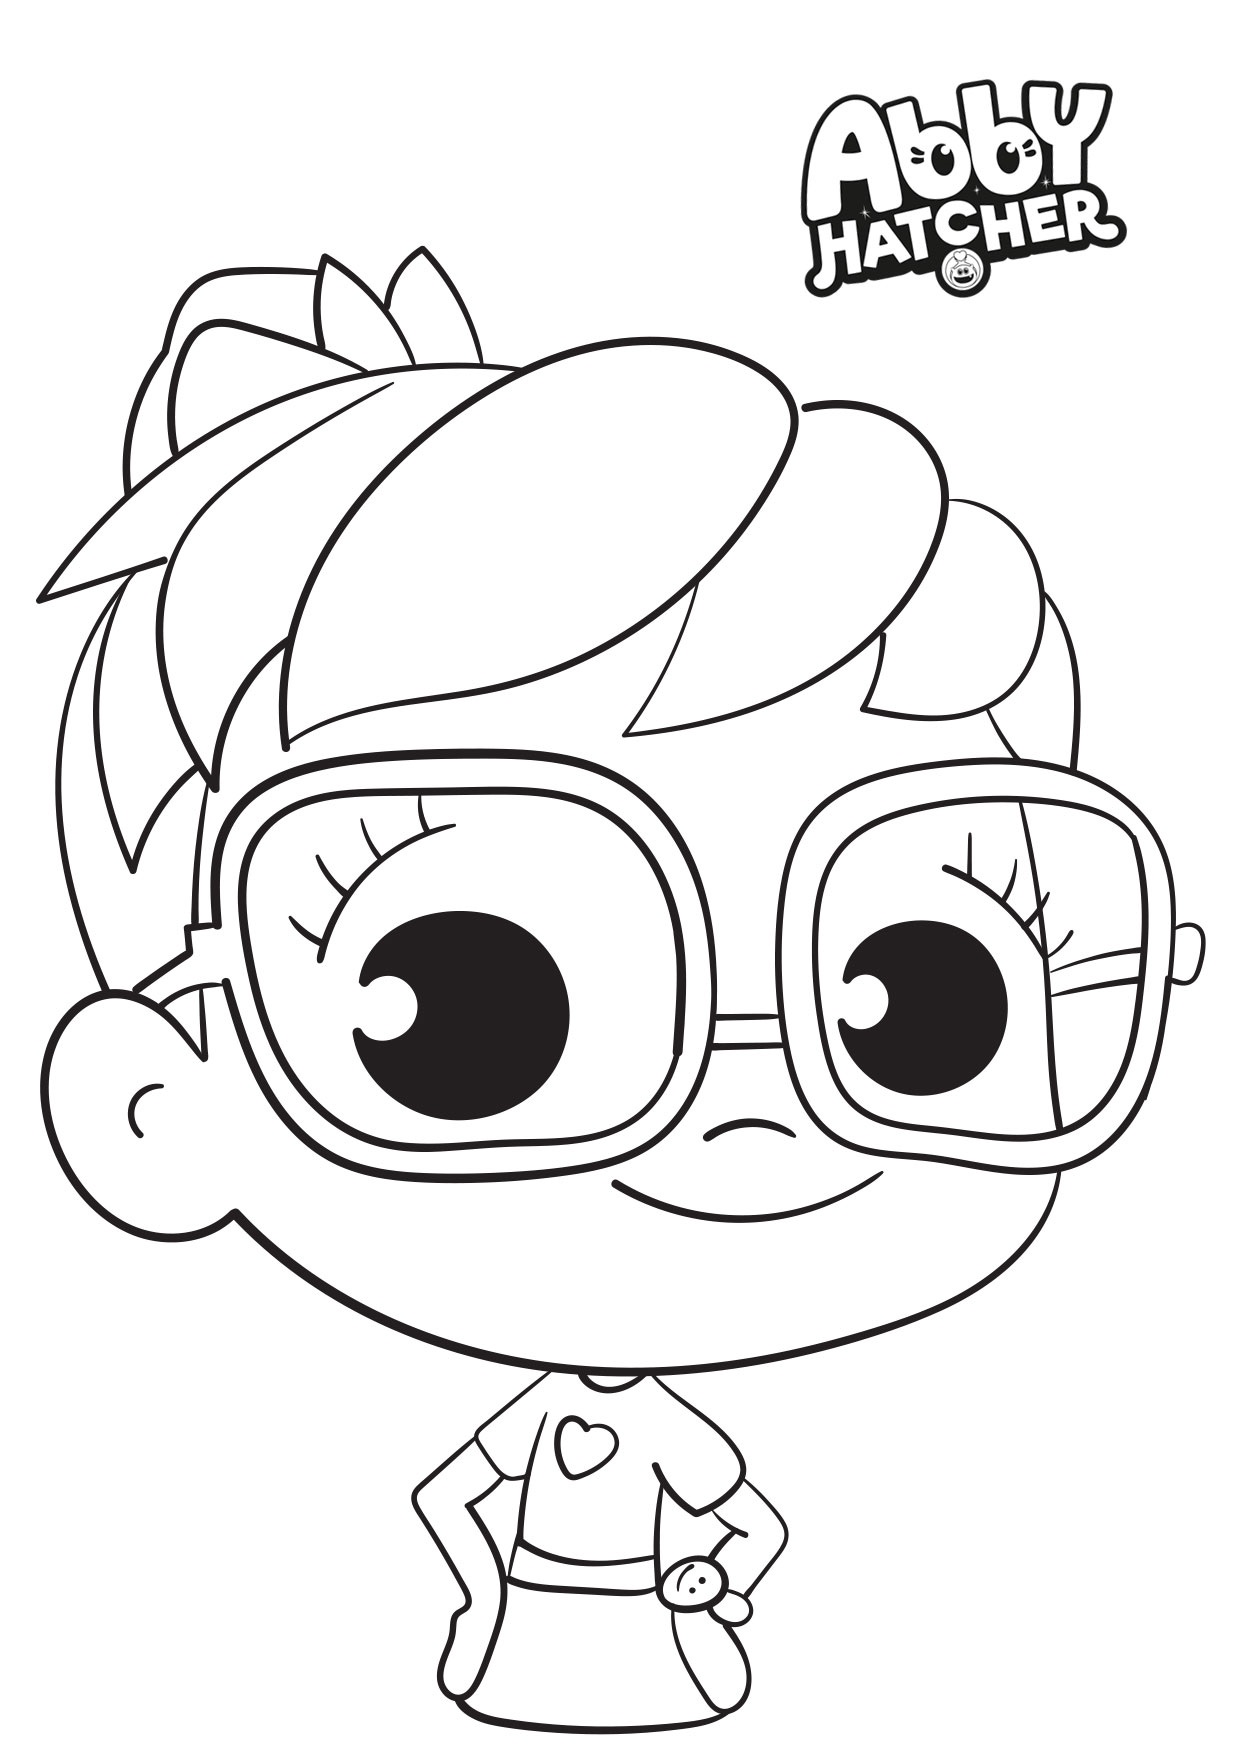 Abby Hatcher Looking Cute Coloring Pages Abby Hatcher Coloring Pages Coloring Pages For Kids And Adults